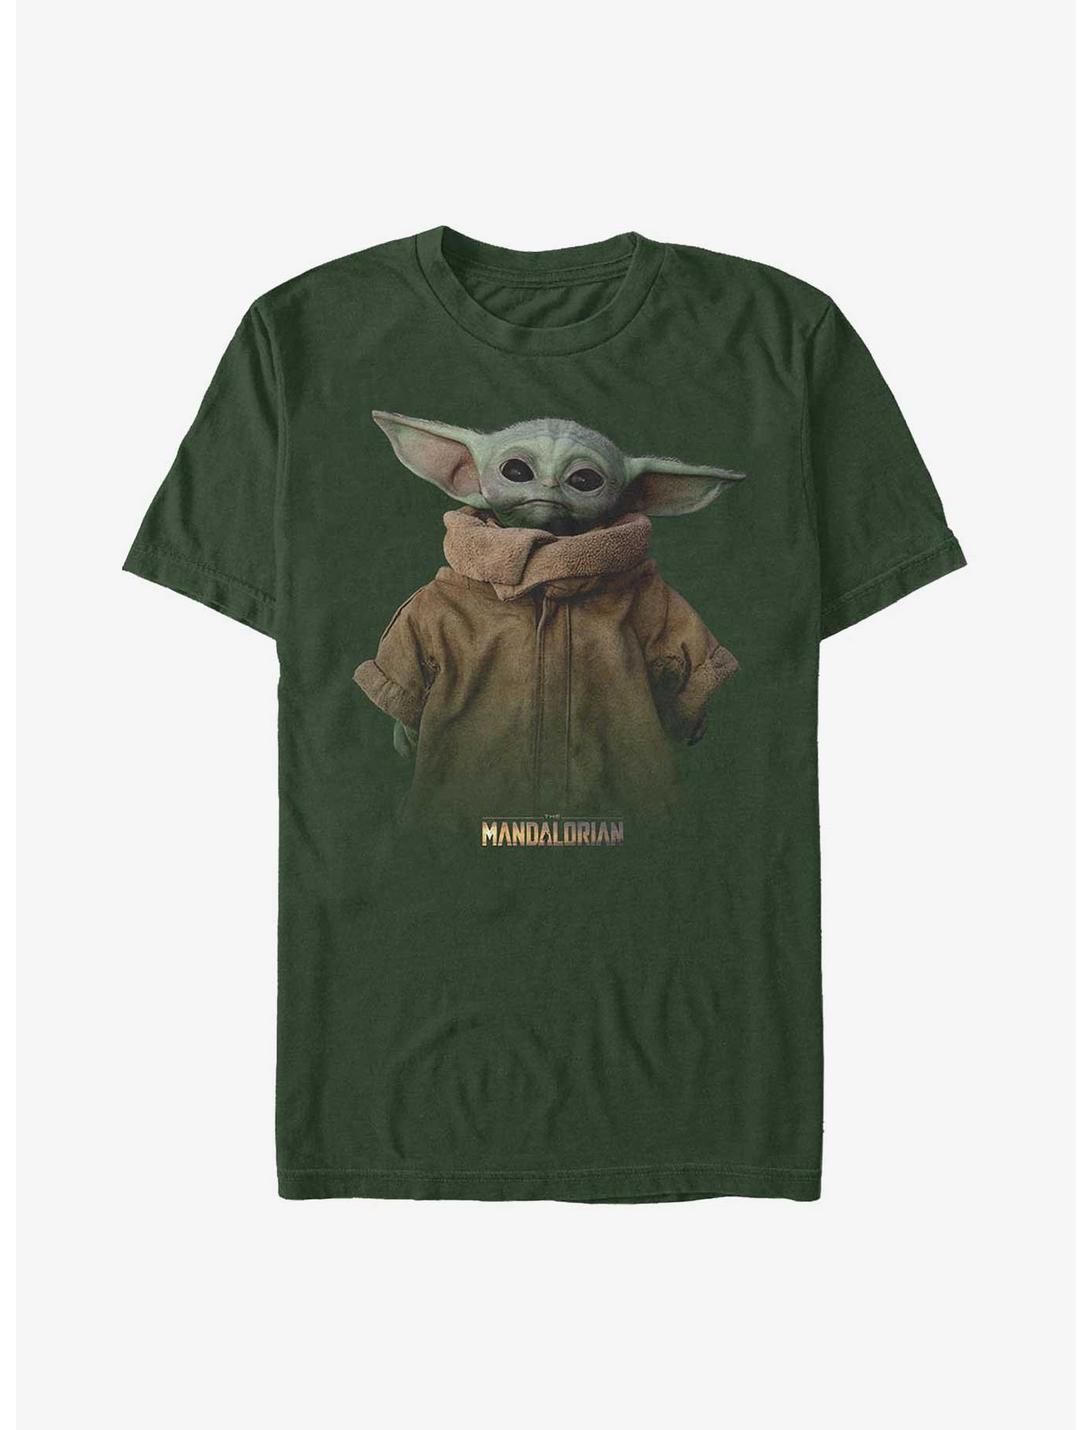 Star Wars The Mandalorian Grogu The Child T-Shirt, FOREST GRN, hi-res